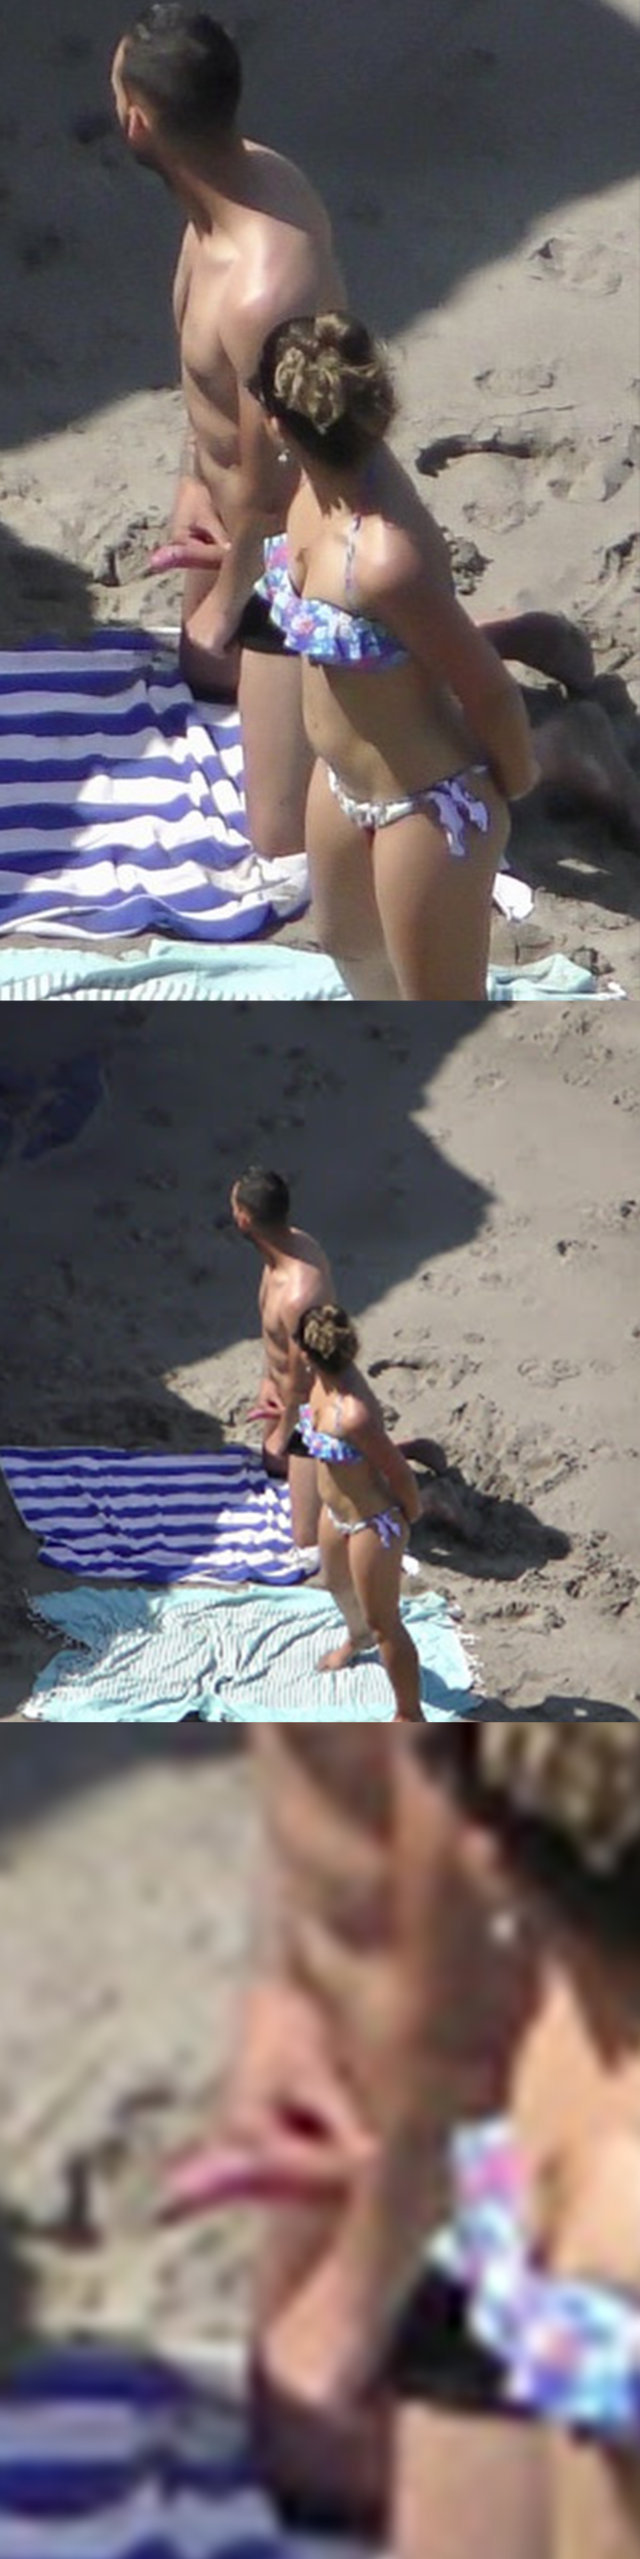 straight nudist guy caught with erection at the beach